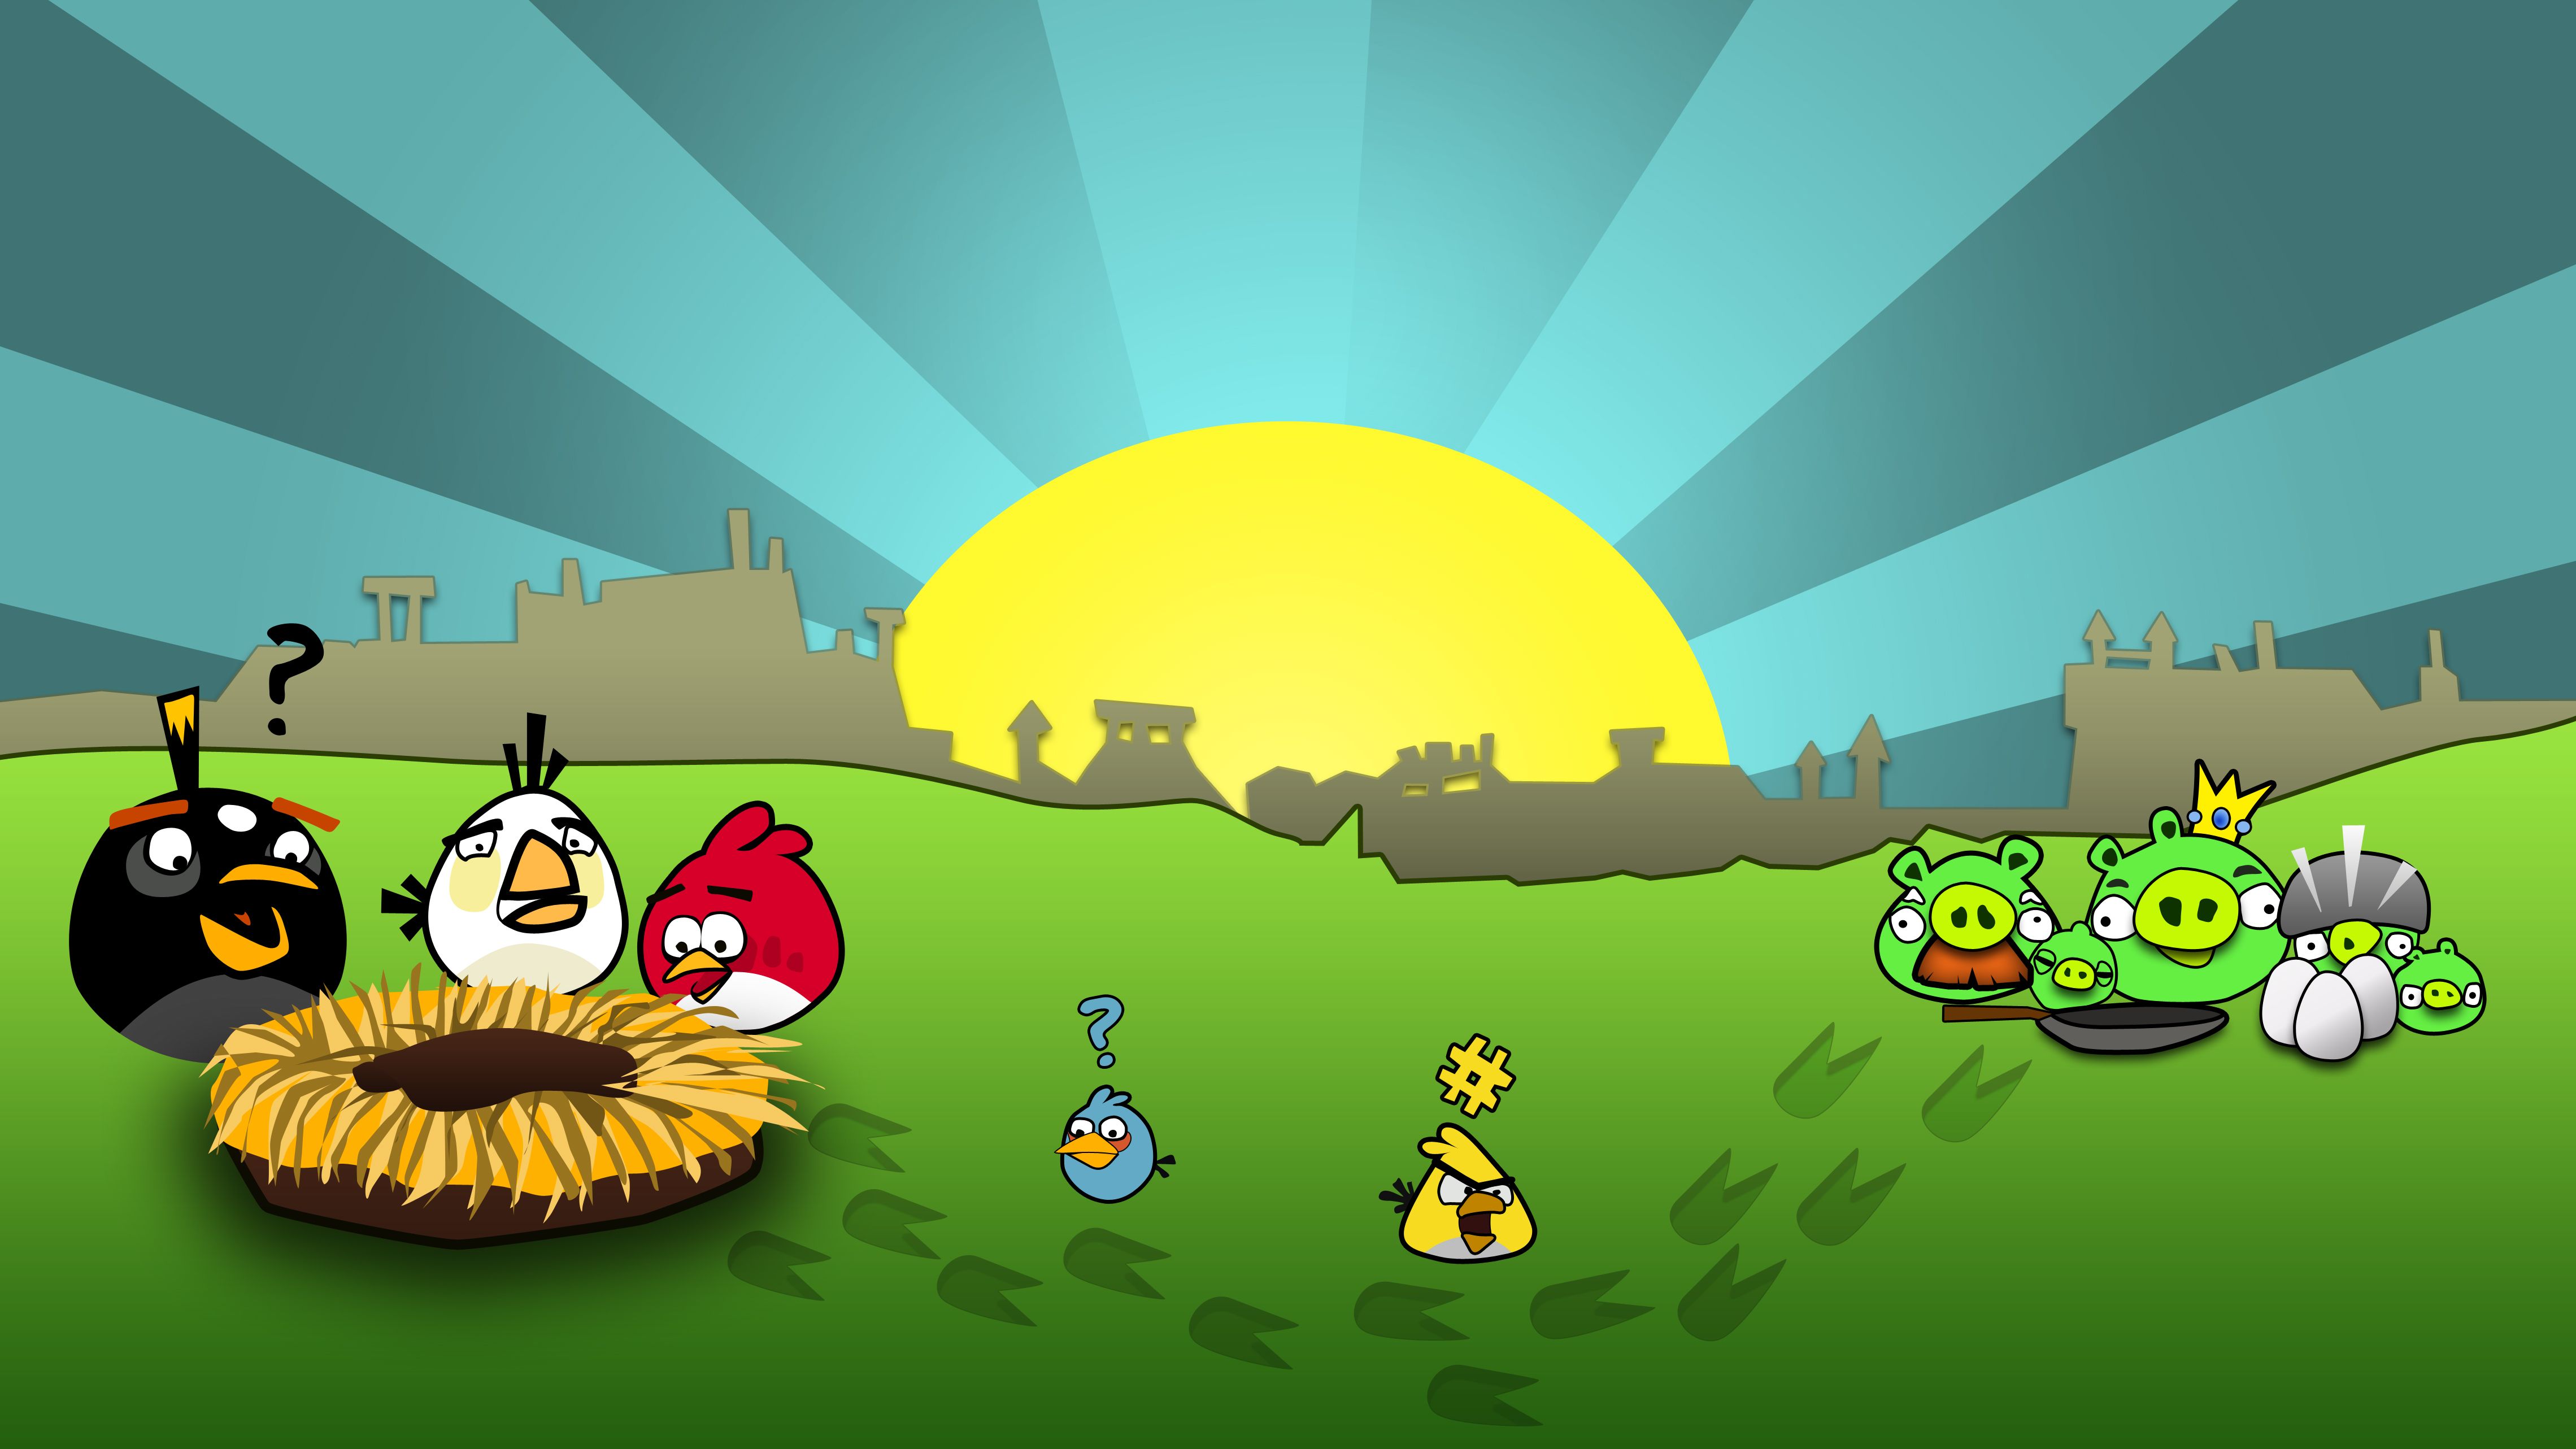 Wallpapers Angry Bird